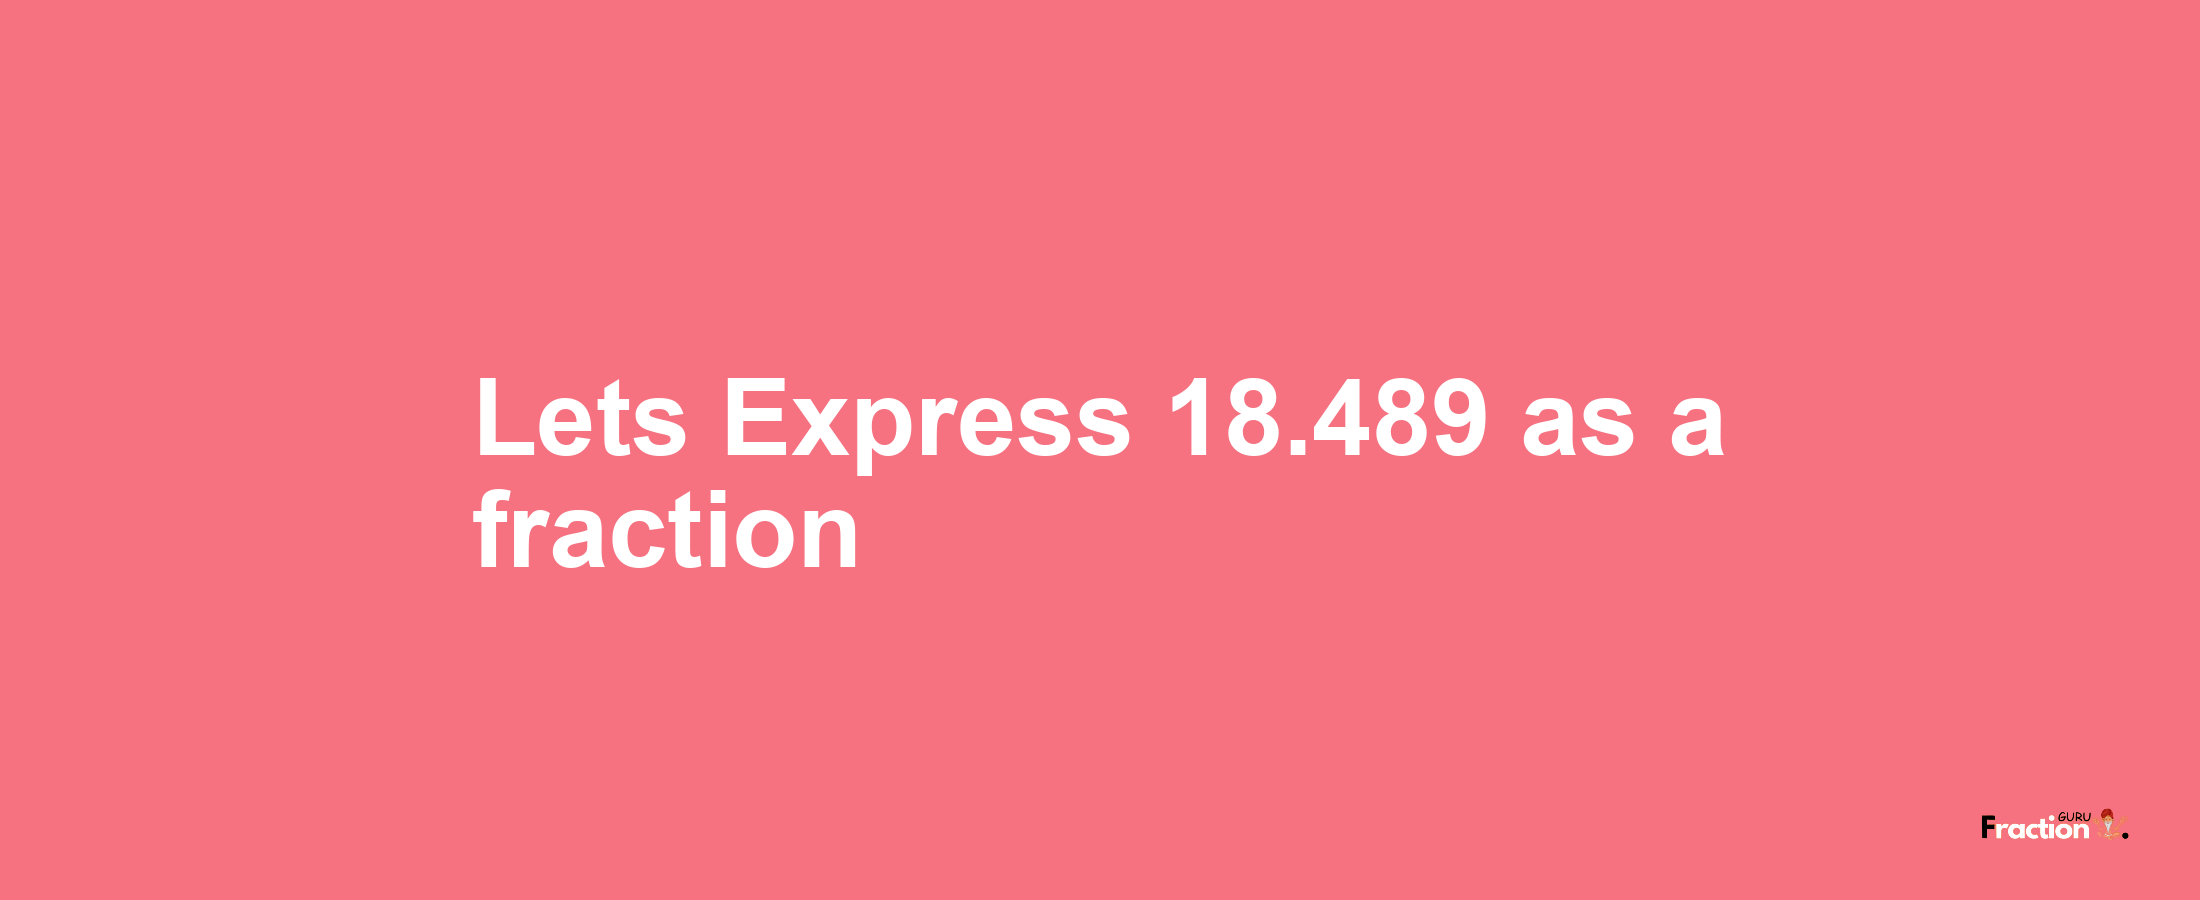 Lets Express 18.489 as afraction